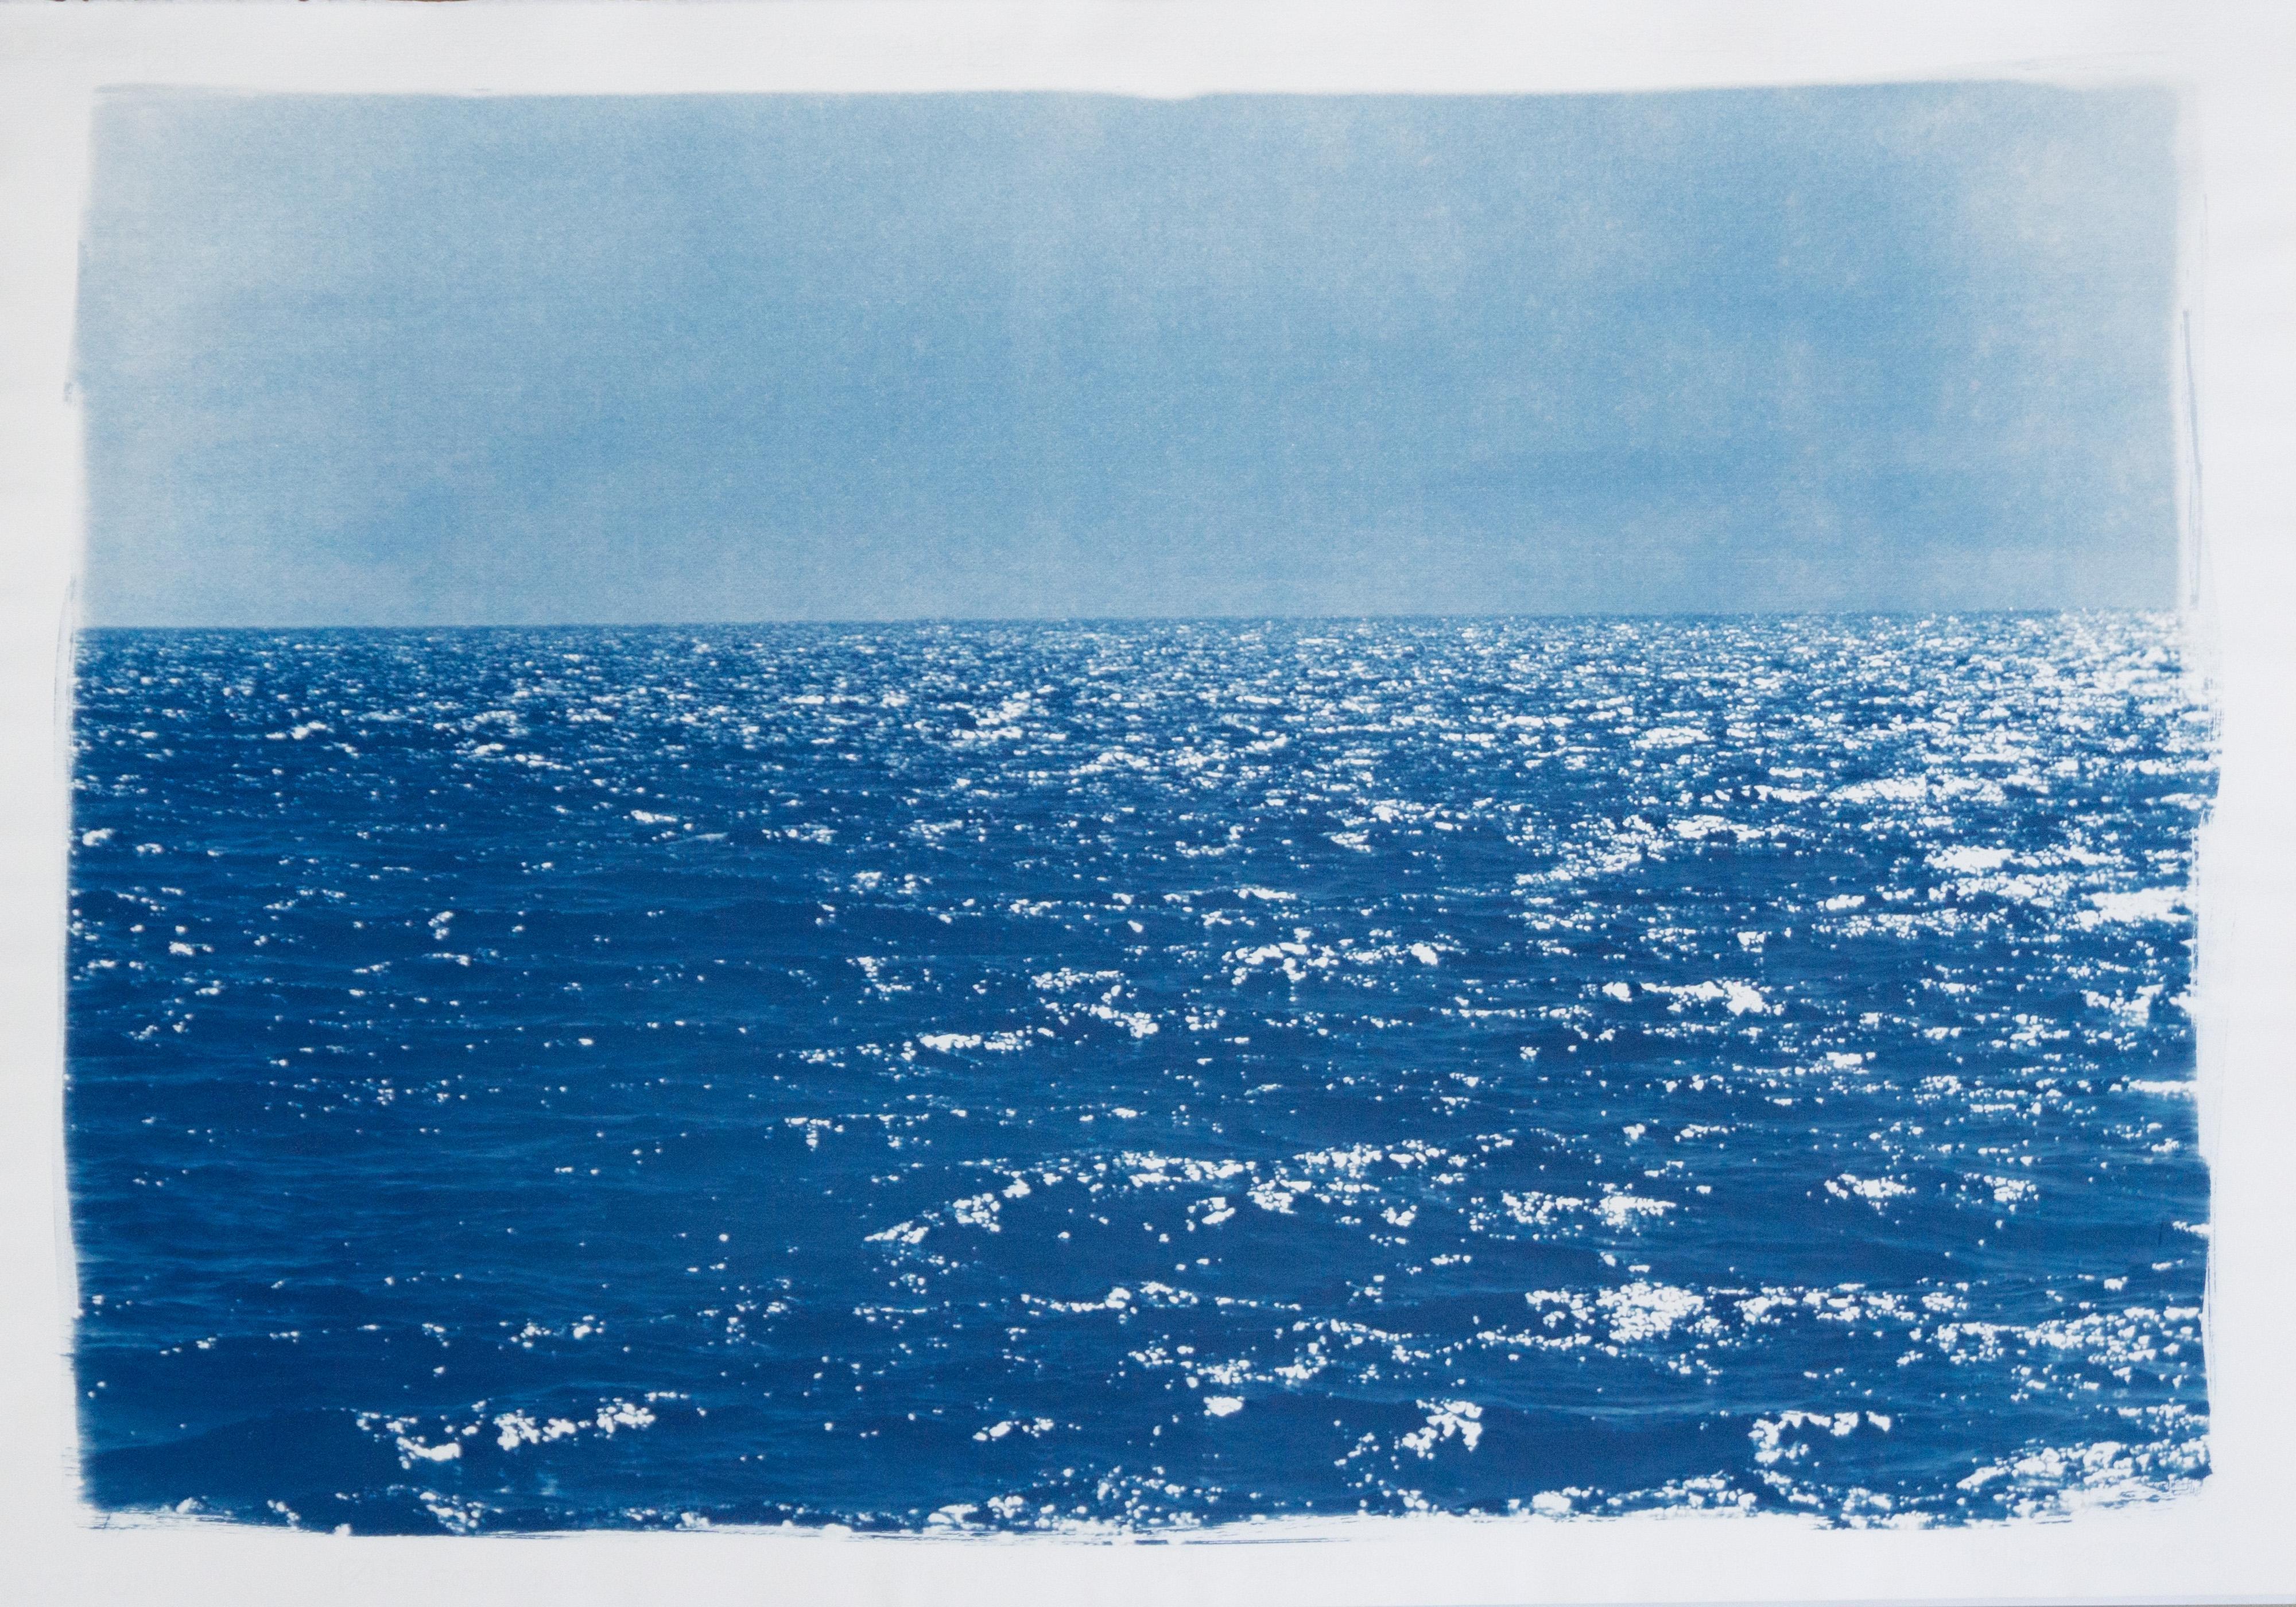 Kind of Cyan Landscape Art - Coastal Blue Cyanotype of Day Time Seascape,  40x28 in. Nautical Painting Shore